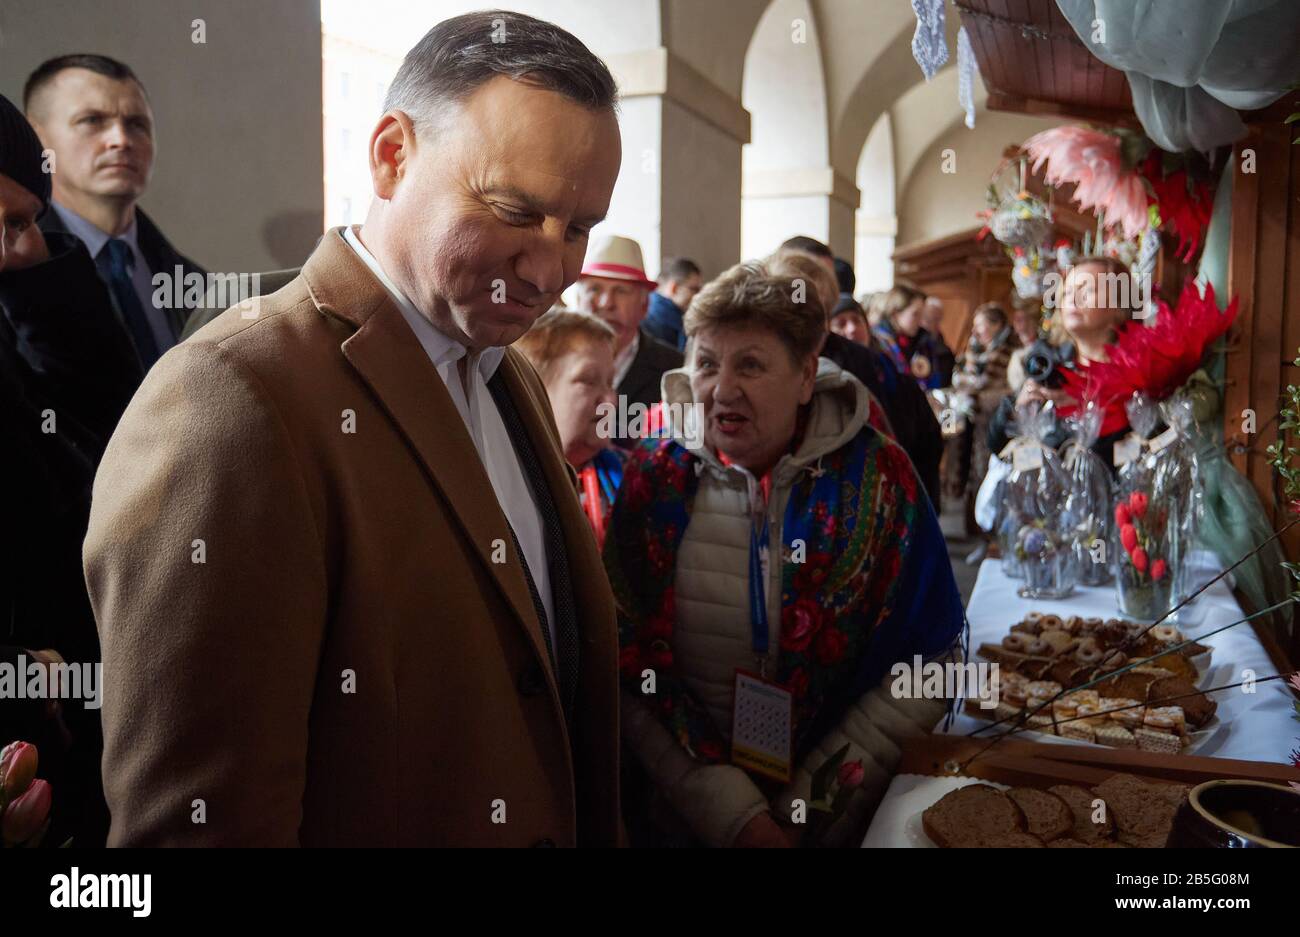 Warsaw, Mazovian, Poland. 8th Mar, 2020. A Walk Of The Presidential Couple During Which President ANDRZEJ DUDA Gave Flowers To Women He Met And Made Wishes On The Occasion Of Women's Day.in the picture: AGATA KORNHAUSER-DUDA, ANDRZEJ DUDA Credit: Hubert Mathis/ZUMA Wire/Alamy Live News Stock Photo